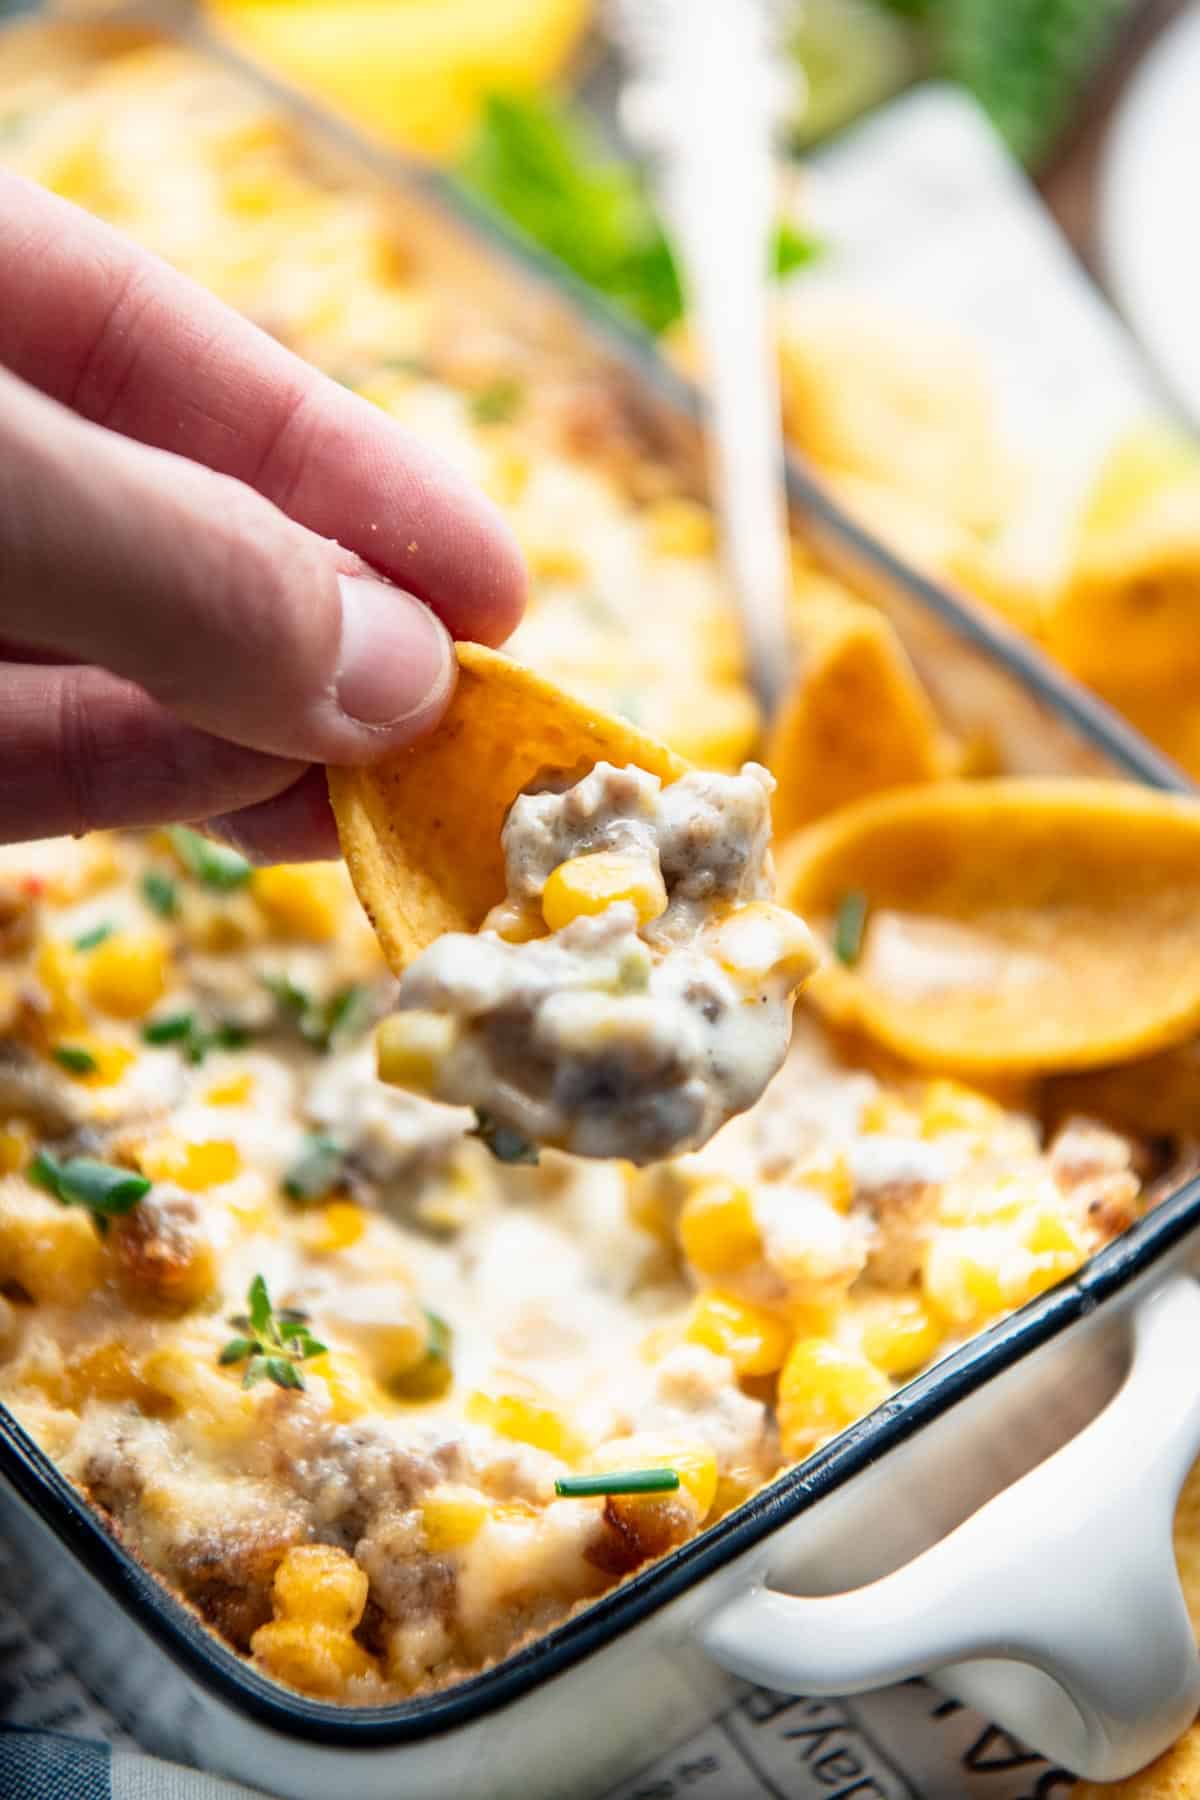 Hand holding a chip with corn dip.